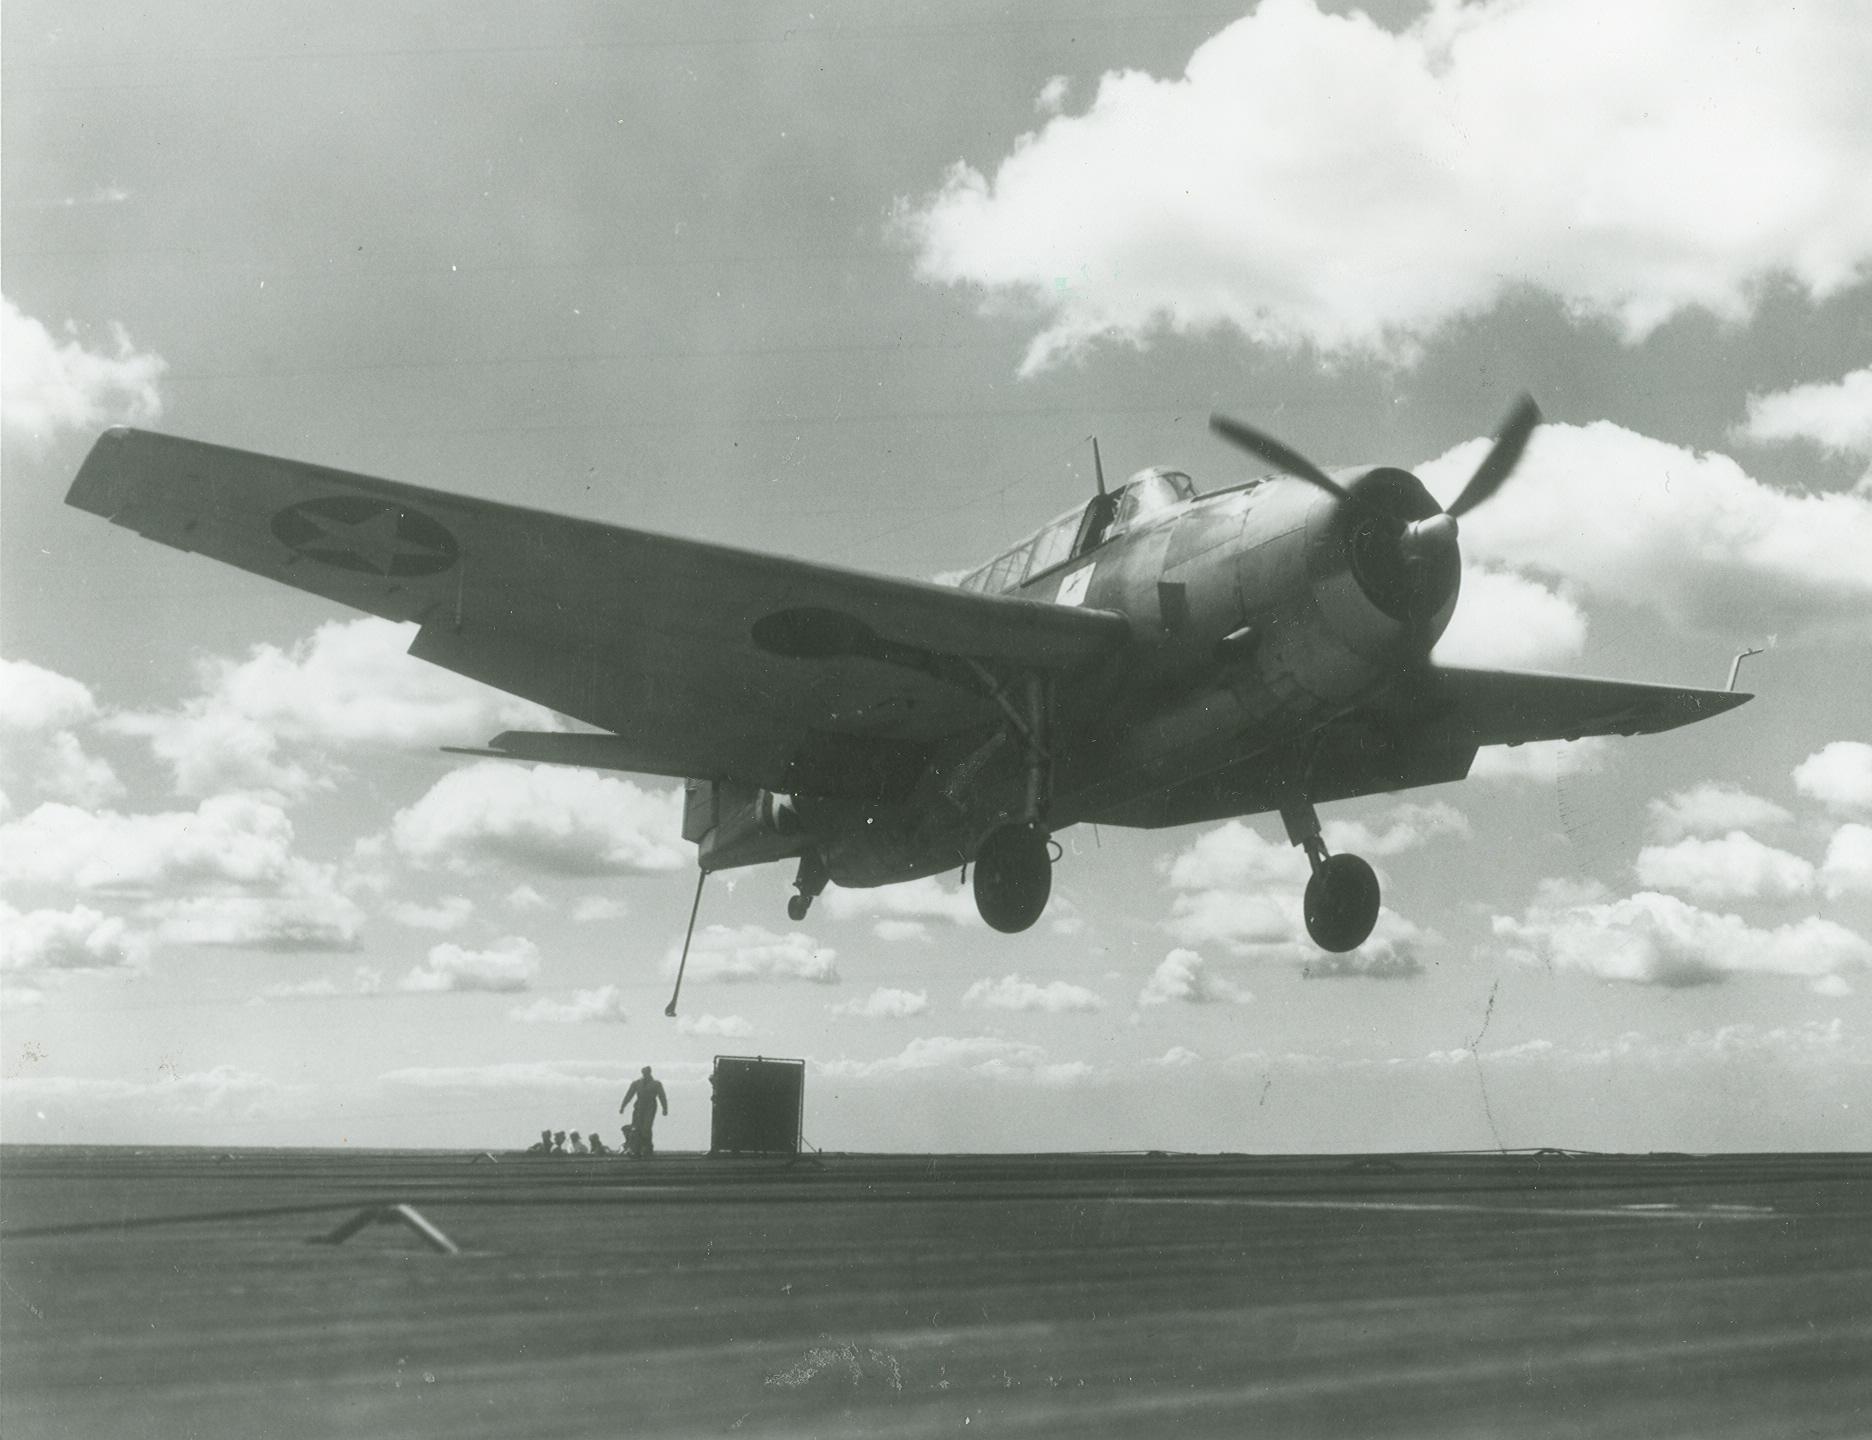 A TBF-1 Avenger with its gear, flaps, and hook down trying to catch the fourth (and last) arresting wire aboard the training aircraft carrier USS Wolverine on Lake Michigan, United States, 17 Aug 1943. Next stop, the barrier.